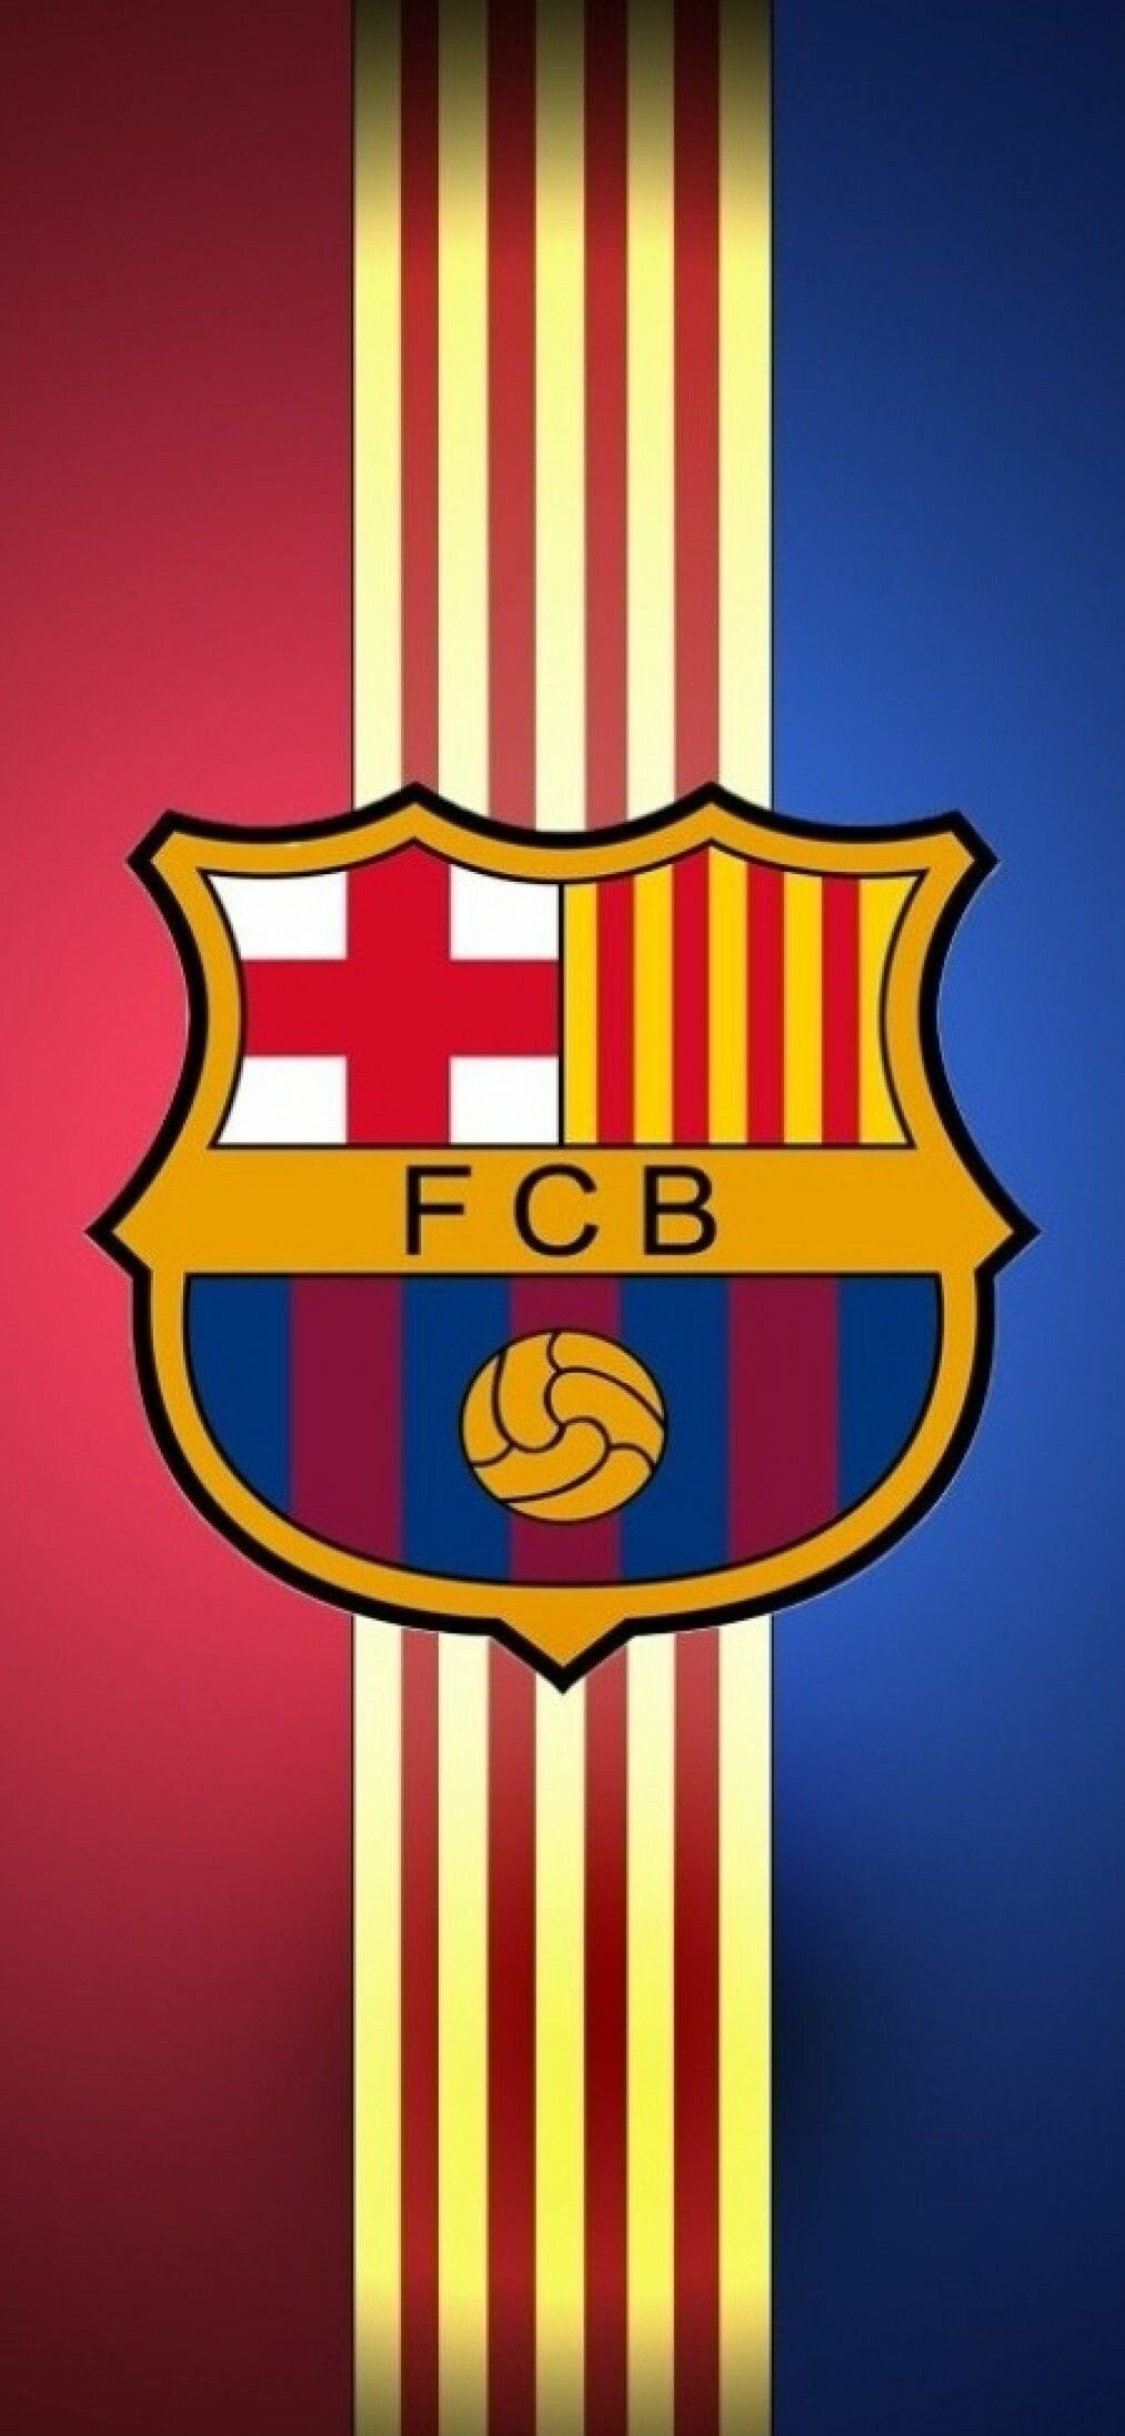 FC Barcelona: The symbol of Catalan culture and Catalanism, The motto “Mes que un club”. 1130x2440 HD Background.